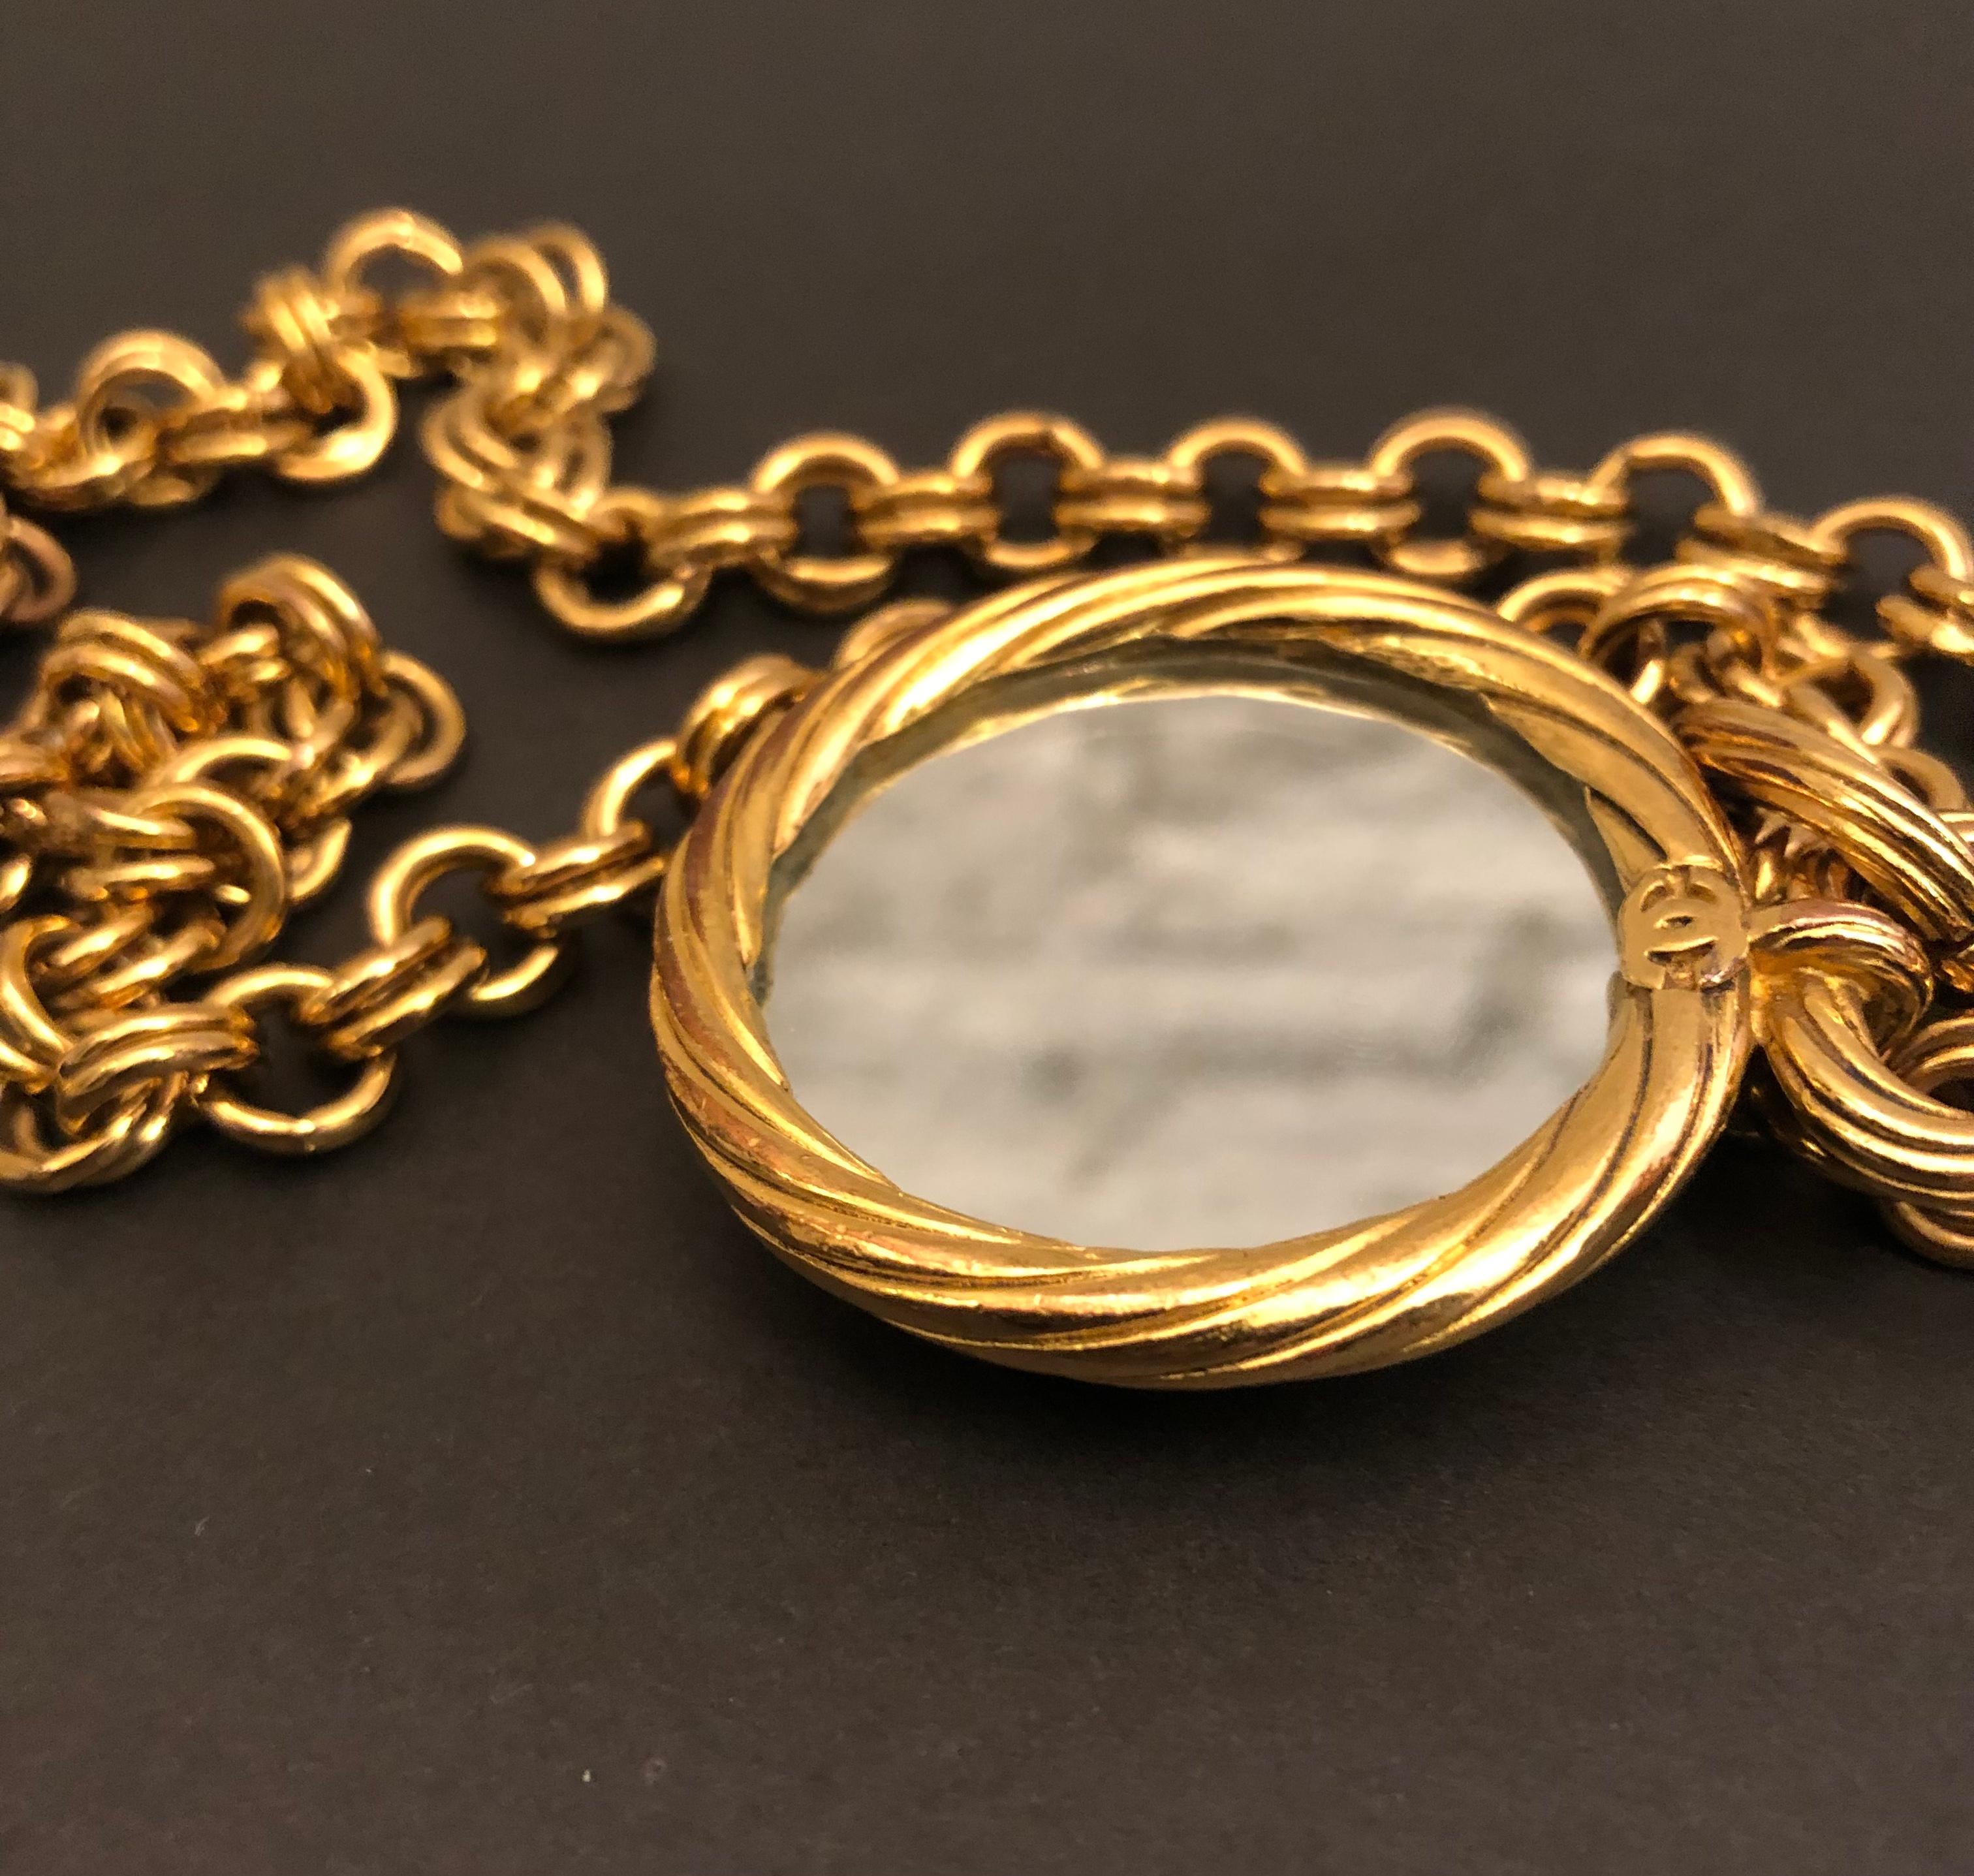 1993 Vintage CHANEL Gold Toned Chain Mirror Necklace For Sale 7